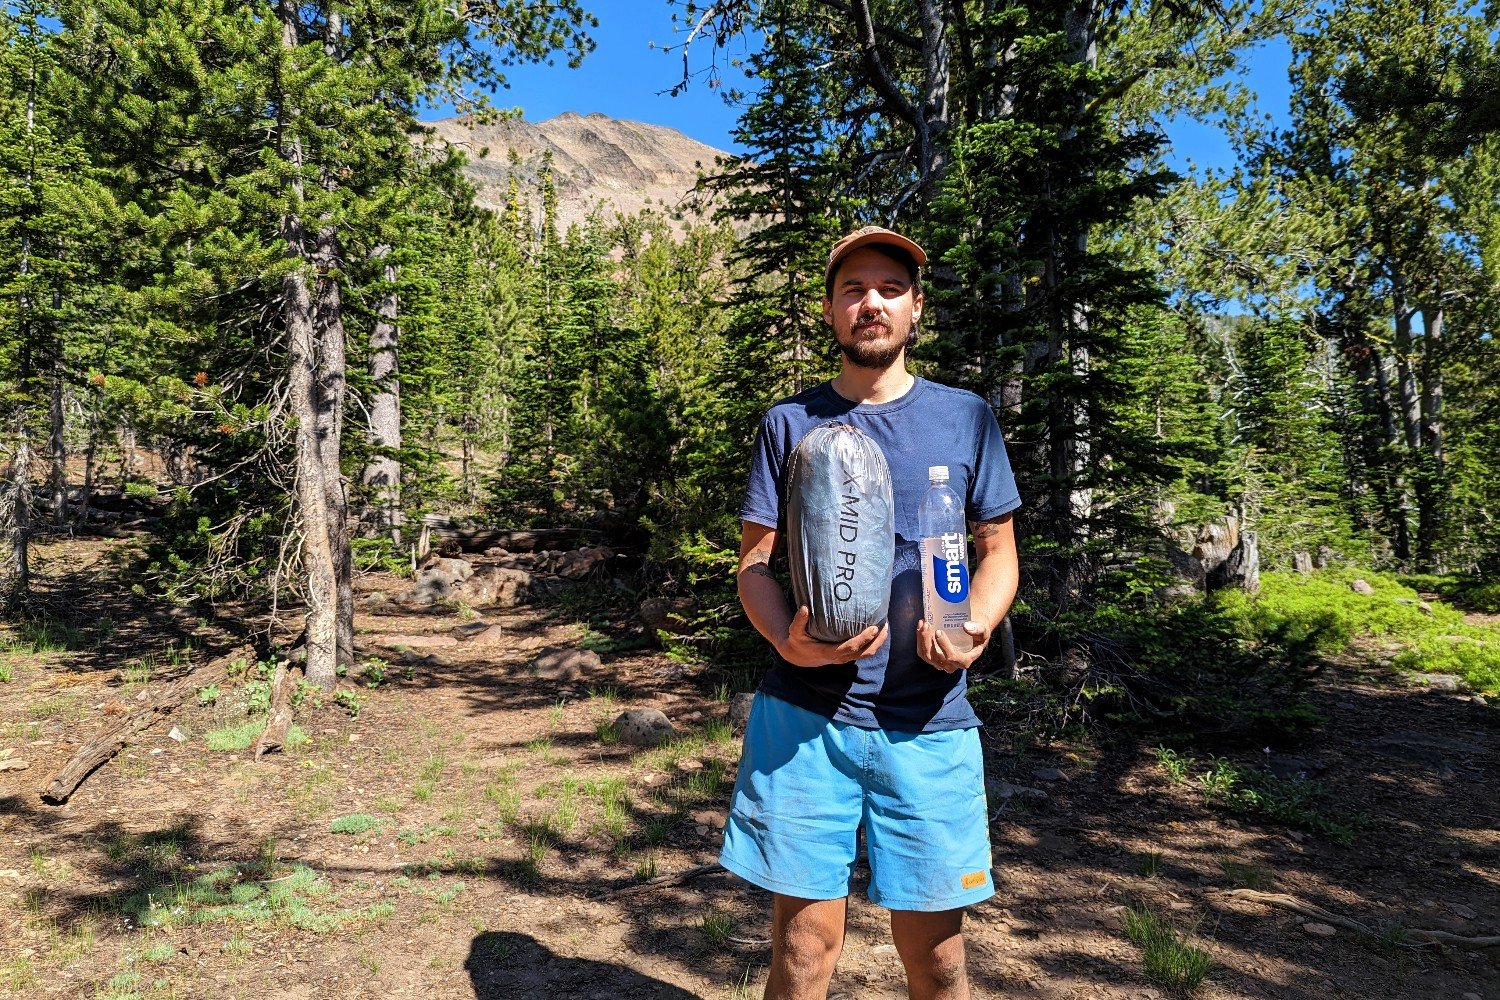 A hiker holding the Durston X-Mid 2 Pro tent packed in its stuff sack in one hand a Smartwater bottle in the other hand to show the size comparison of the two. There's a mountain peak peaking out from behind some pine trees in the background